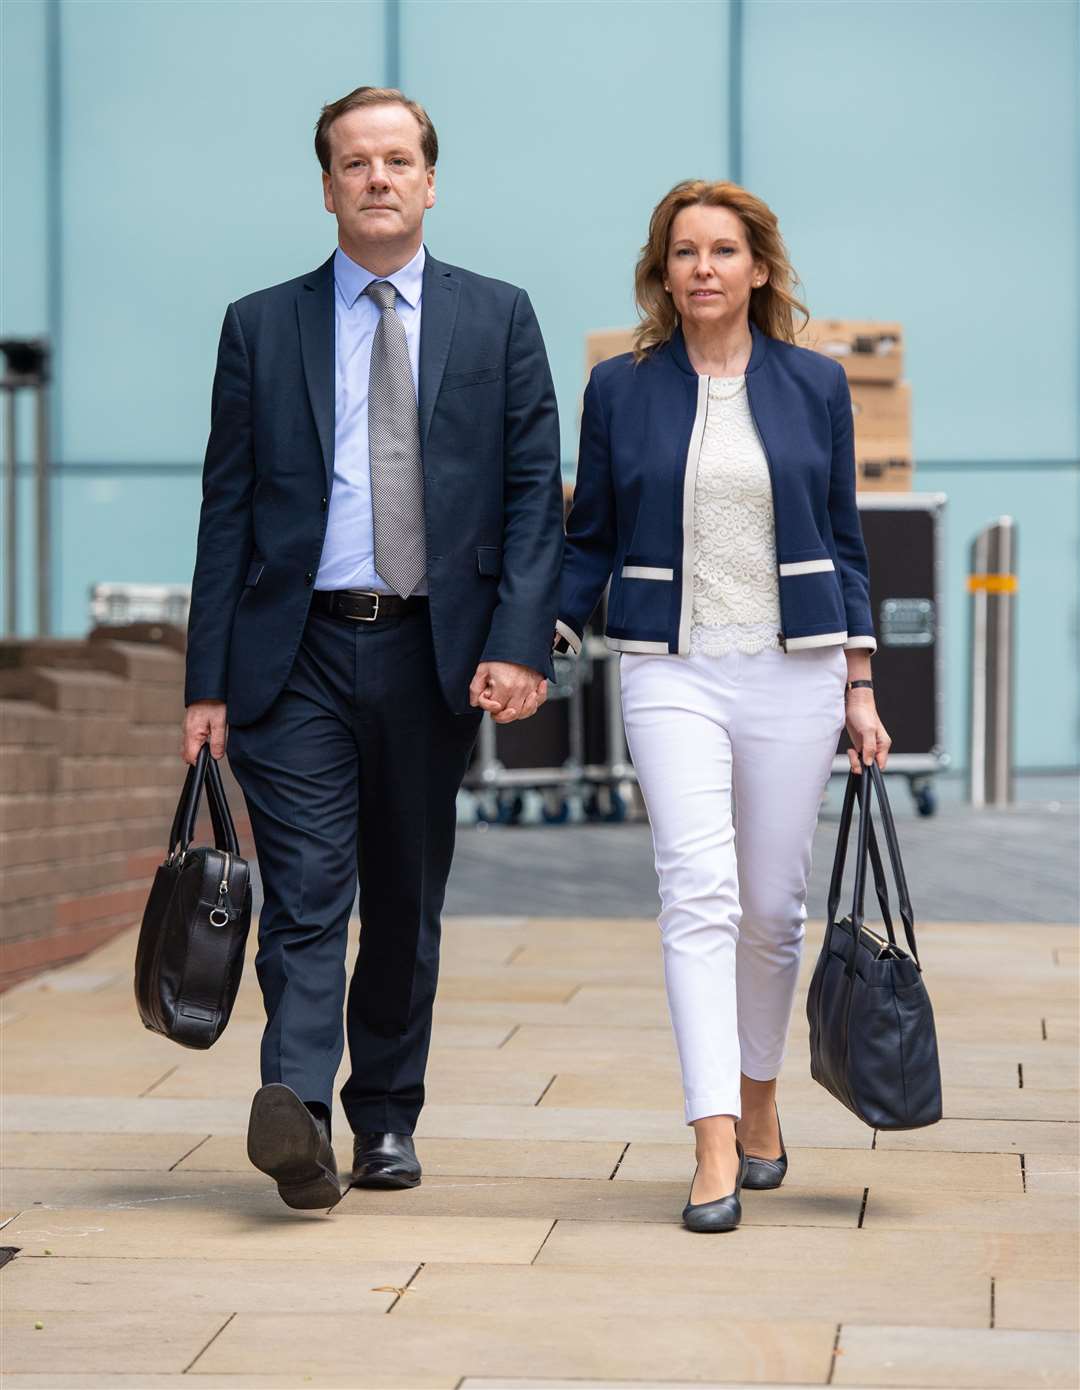 Charlie Elphicke arriving at Southwark Crown Court alongside wife Natalie Elphicke, his successor as MP for Dover (Dominic Lipinski/PA)